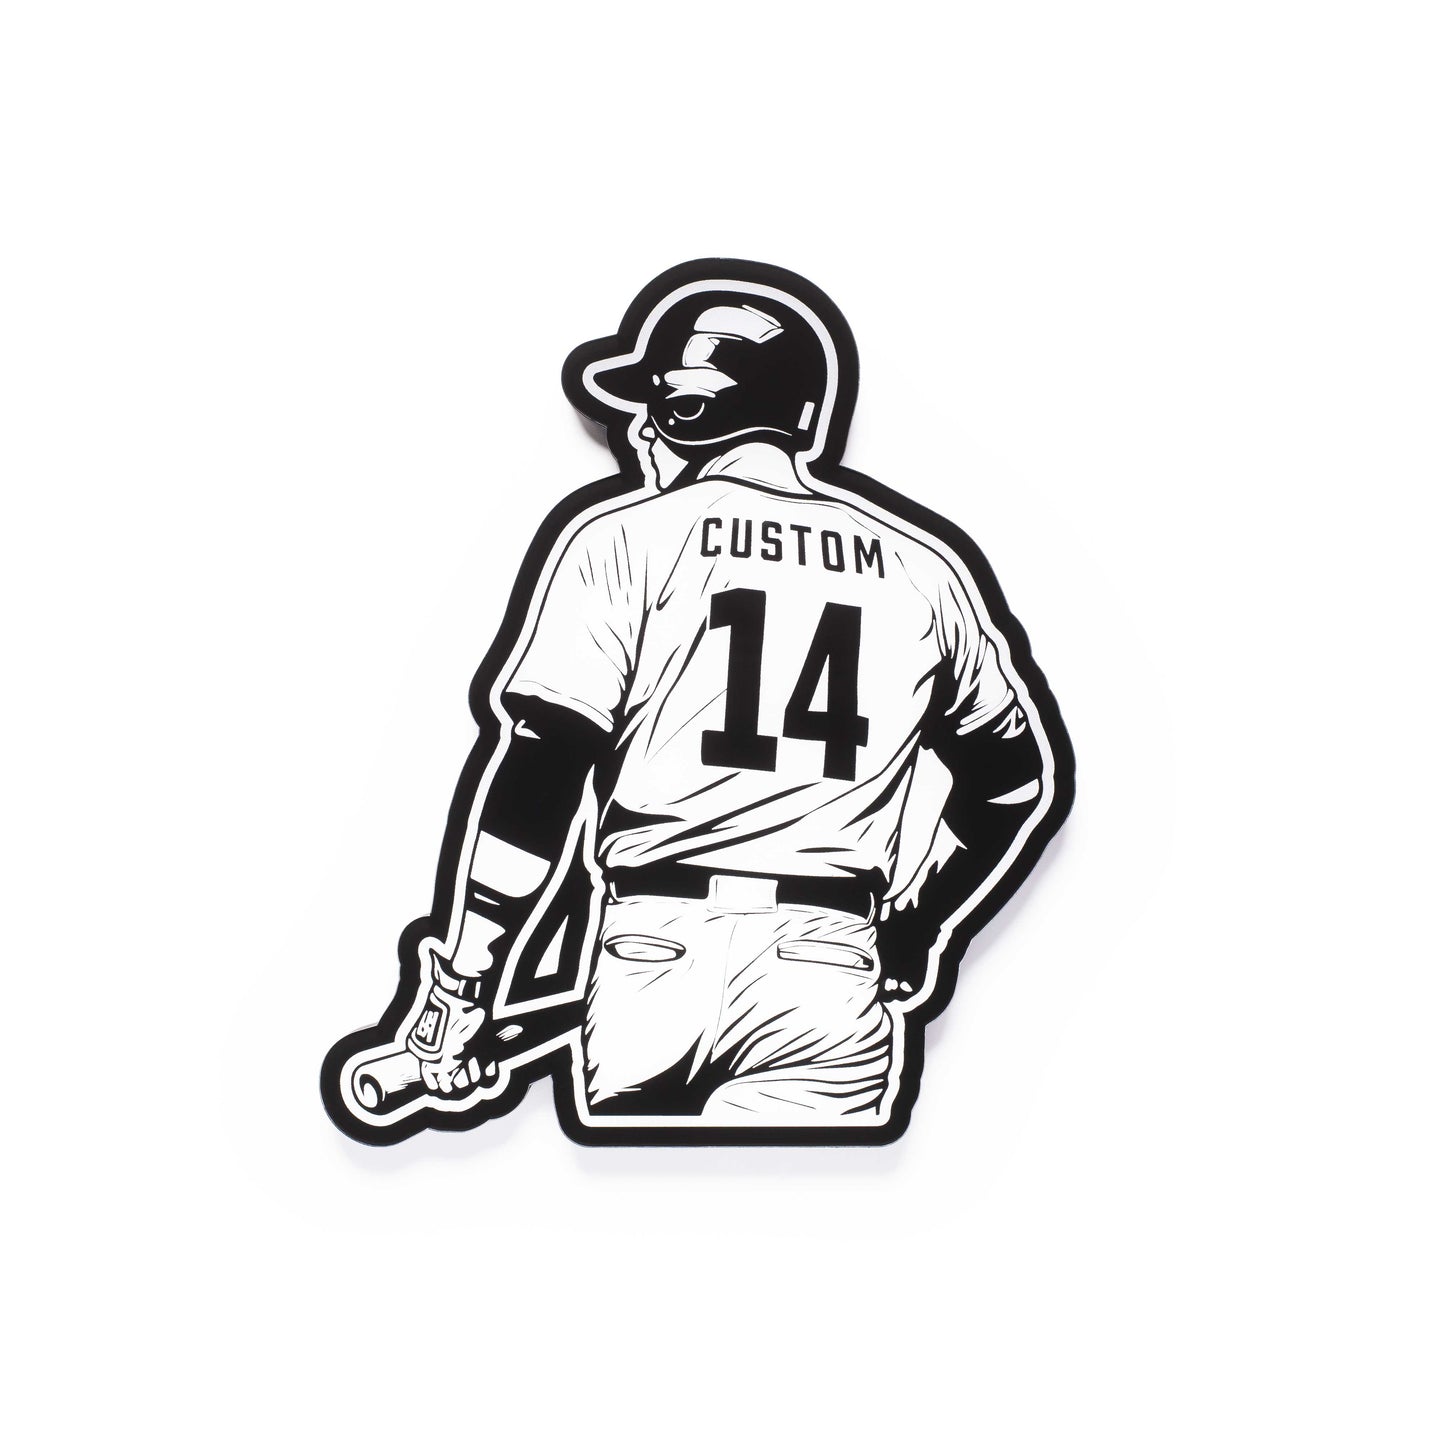 a 3d wall mounted acrylic light, back-lit by  multi-color led lights, featuring a cartoon style illustration of baseball player holding his bat, view from behind showing the back of the baseball players jersey. The text and number on the back of the jersey can be personalised.